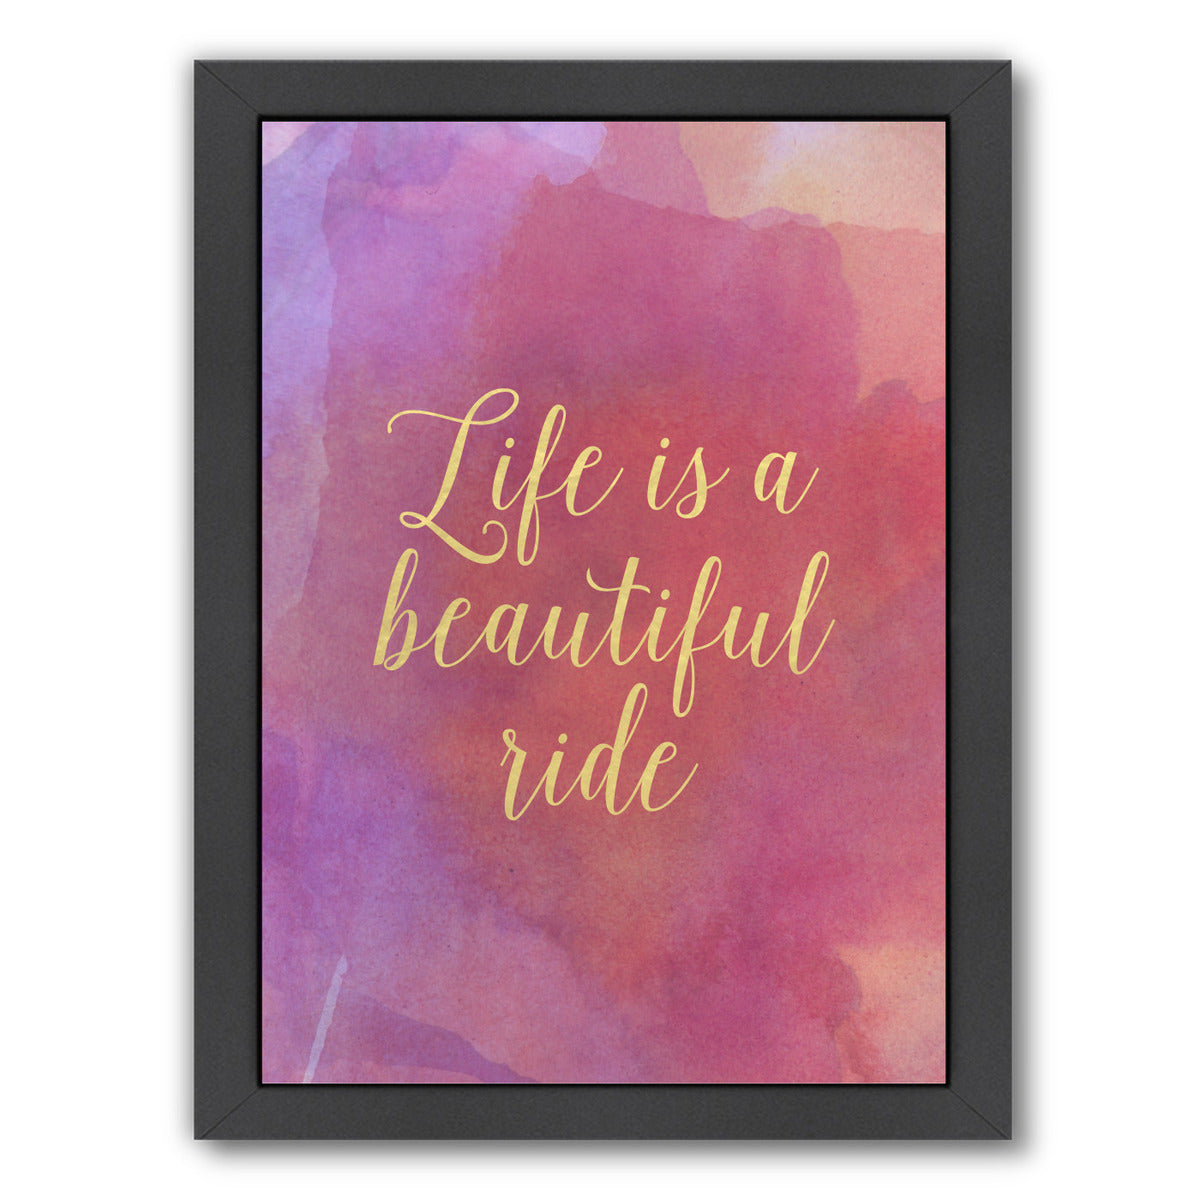 Life Is A Beautiful Ride by Samantha Ranlet Framed Print - Americanflat